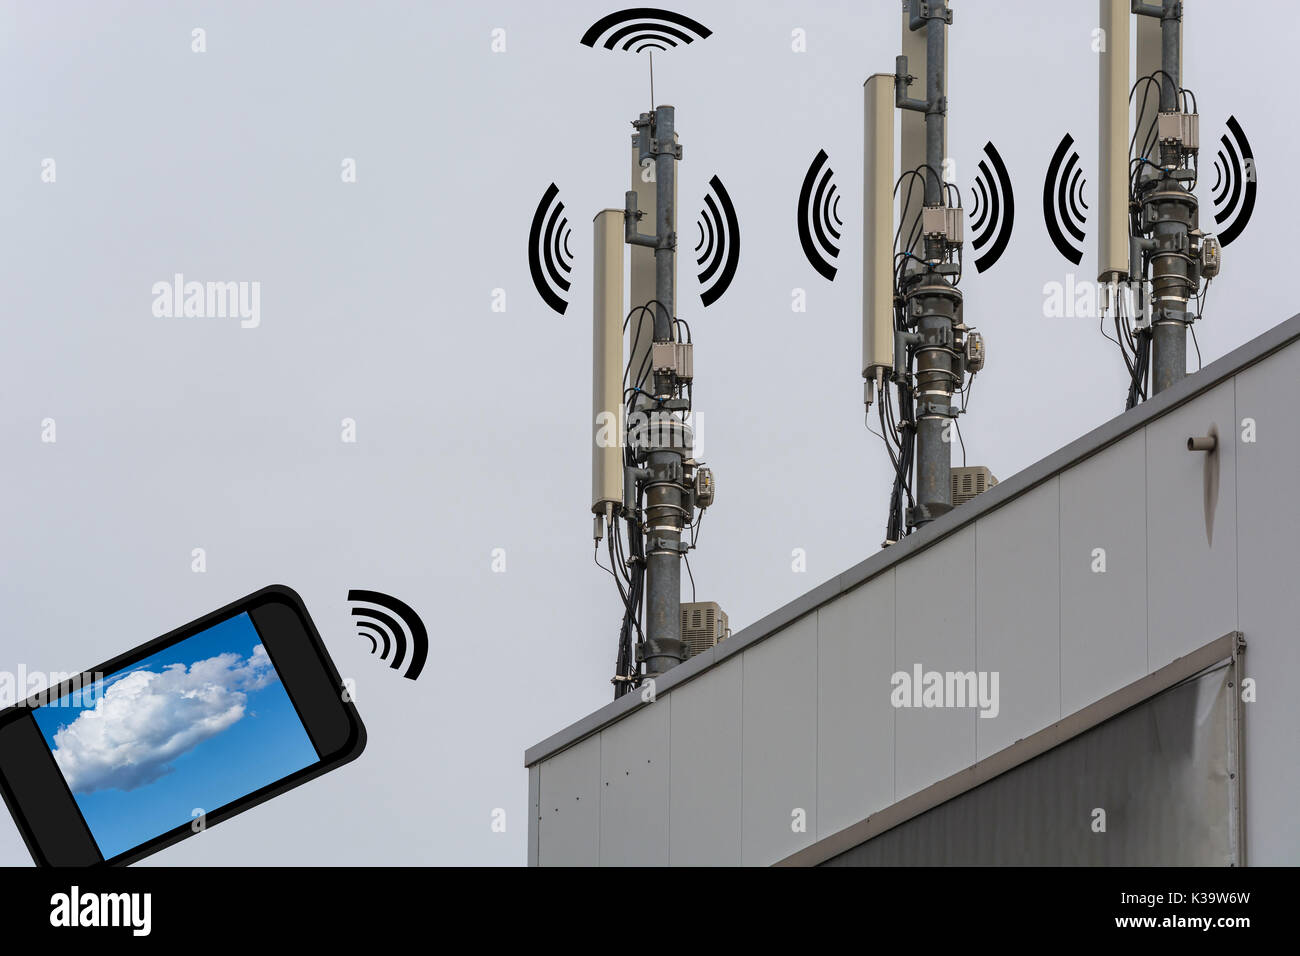 Antenna, telecommunications tower on a roof. Wireless telecommunication concept, home control by smartphone. Stock Photo